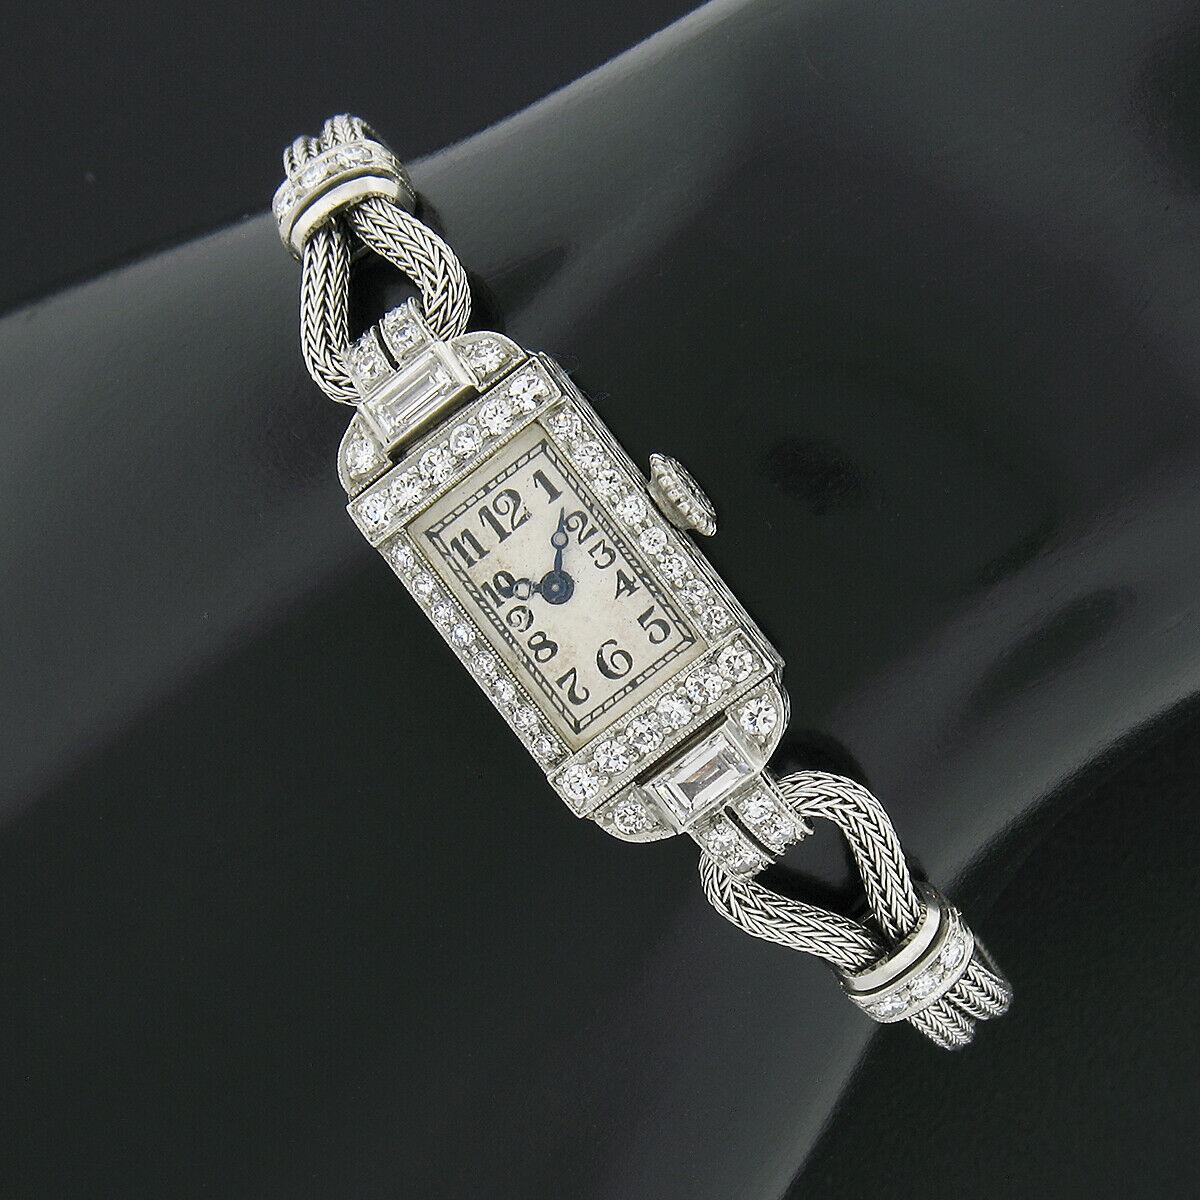 This fancy antique ladies' wrist watch was crafted during the art deco period. It features a mechanical, hand winding, Swiss movement made by C. H. Meylan and keeps excellent time. The platinum rectangular case and crown are adorned with the most